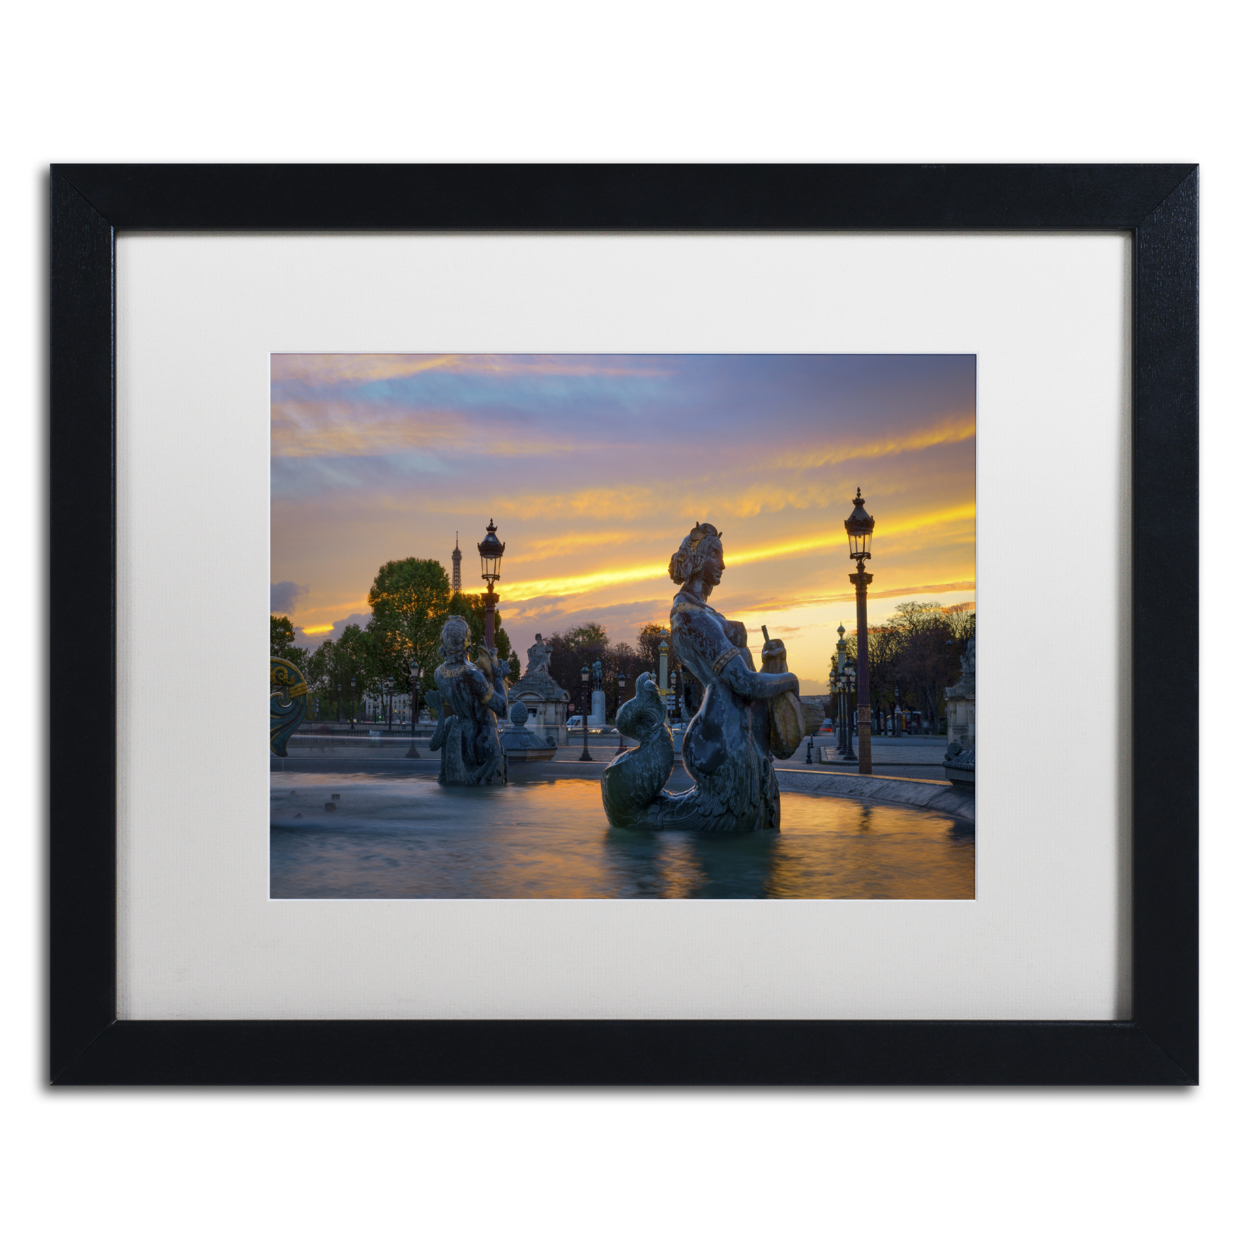 Mathieu Rivrin 'Sunset In Place De La Concorde' Black Wooden Framed Art 18 X 22 Inches